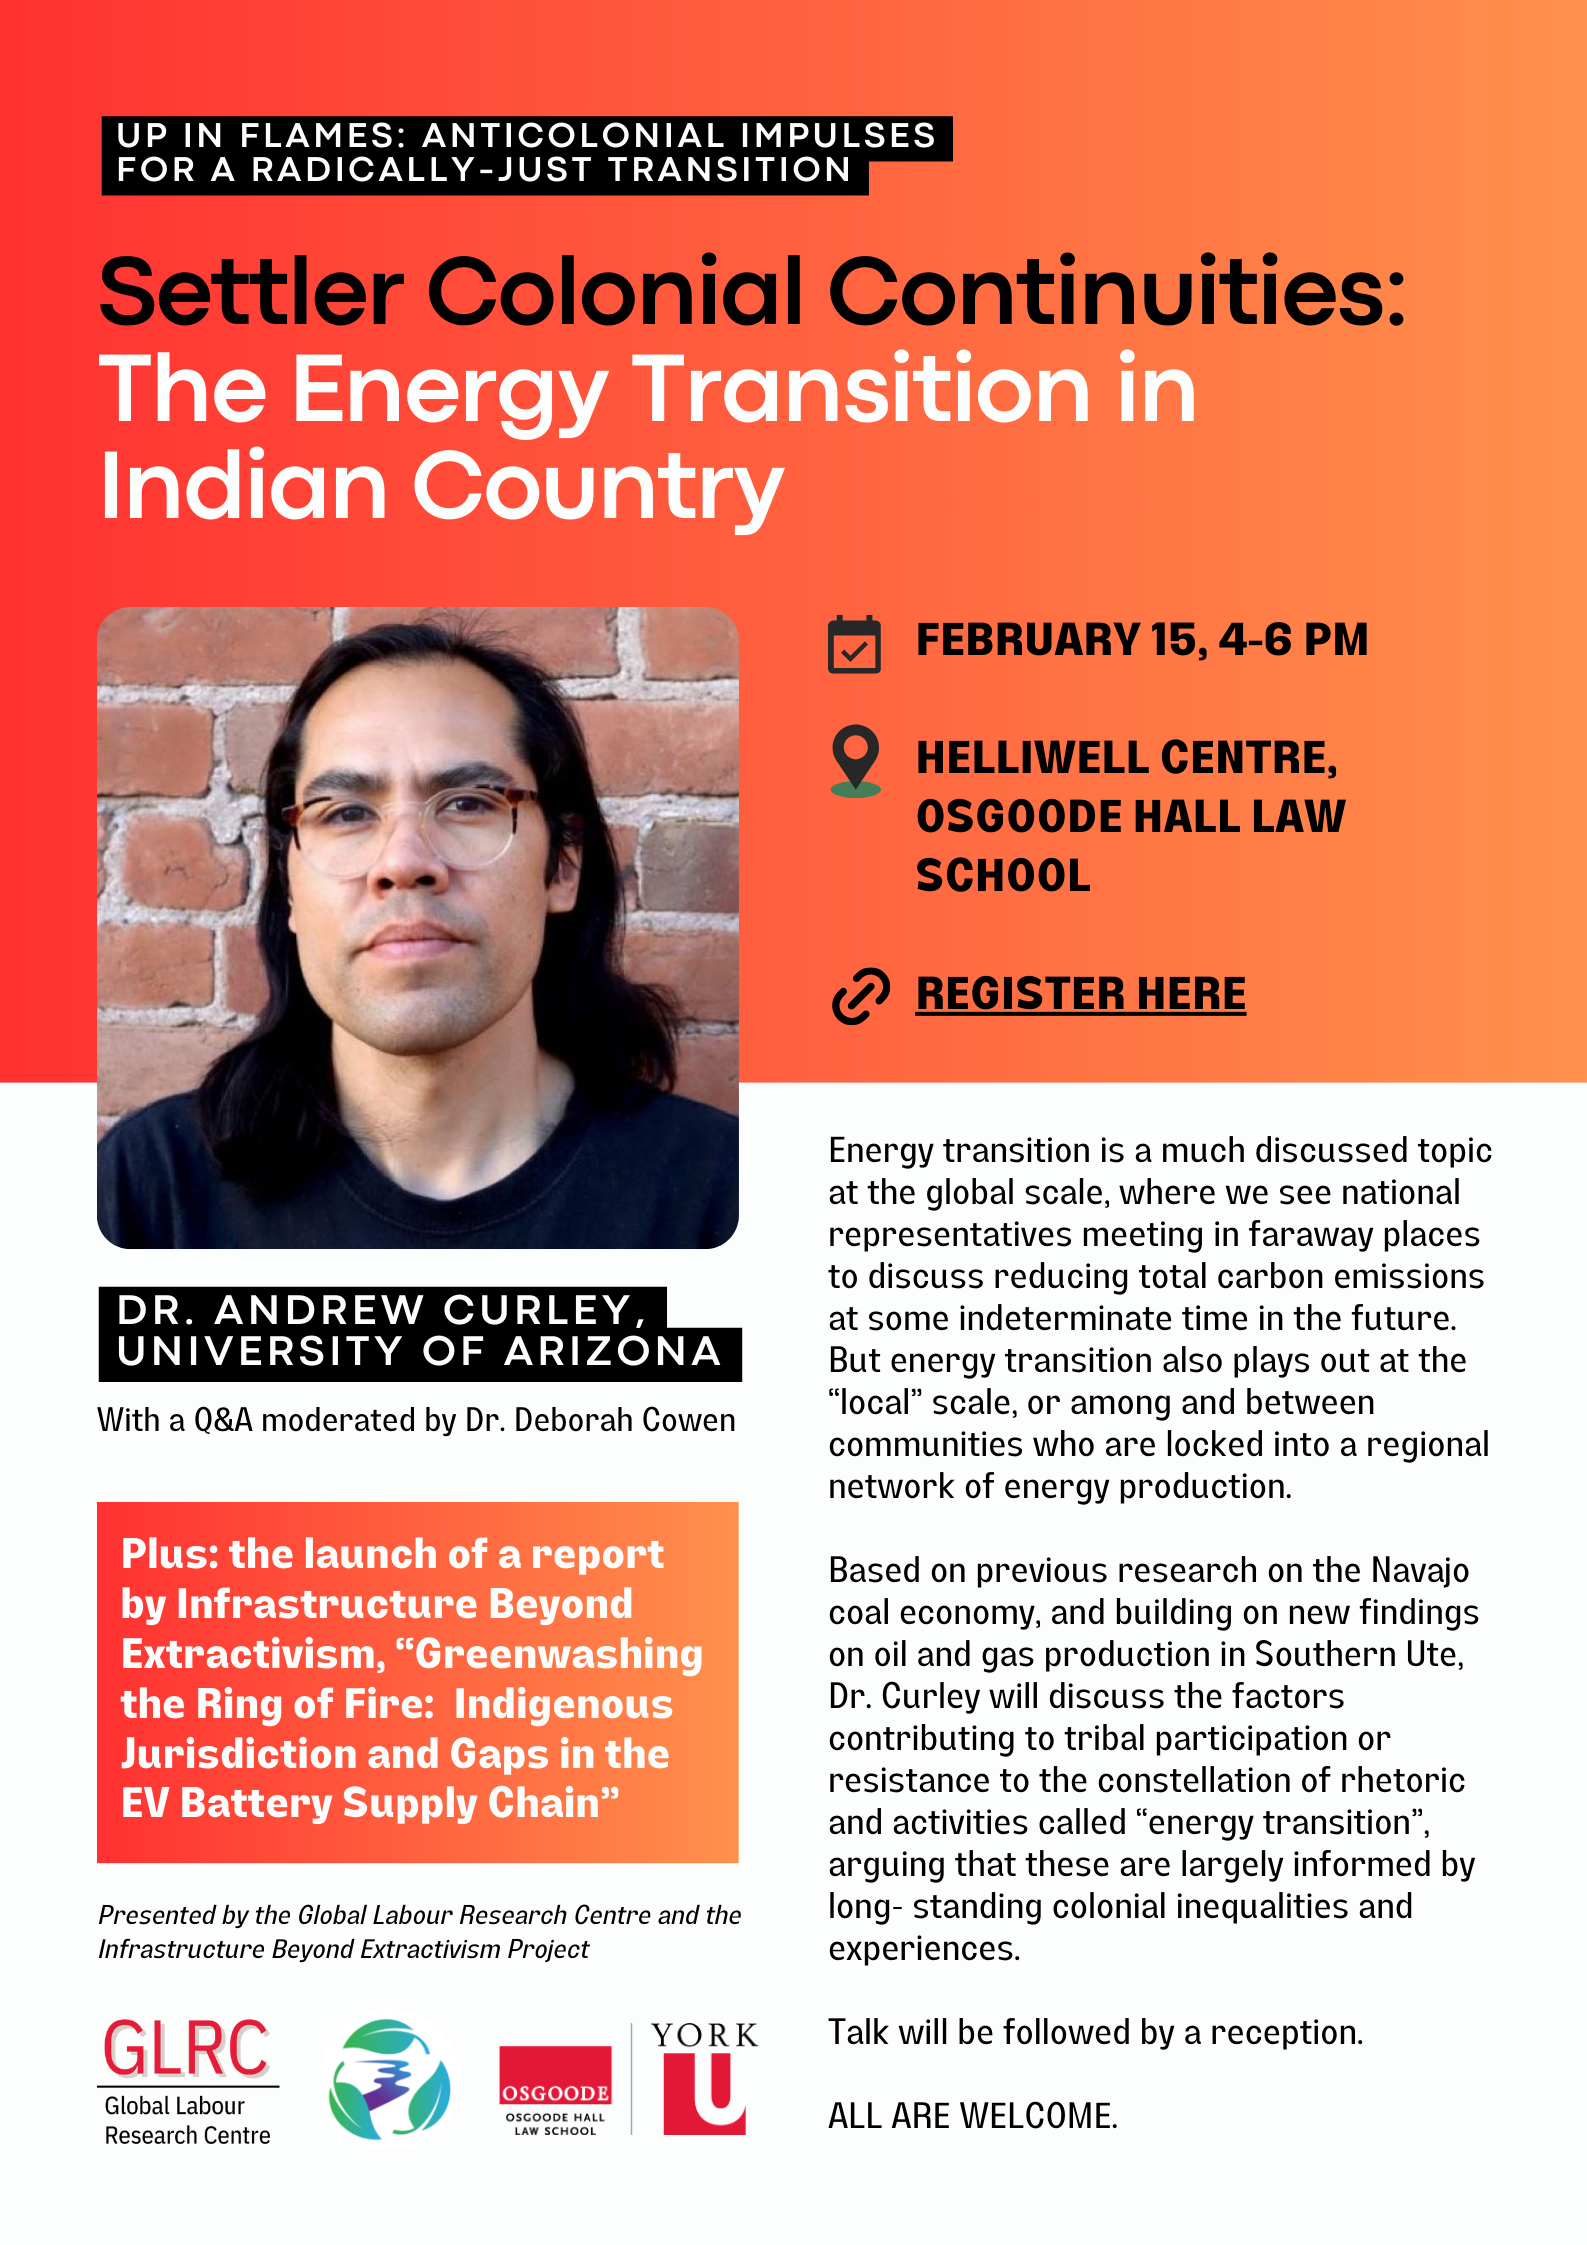 Settler Colonial Continuities: The Energy Transition in Indian Country, with Dr. Andrew Curley, Feb.15